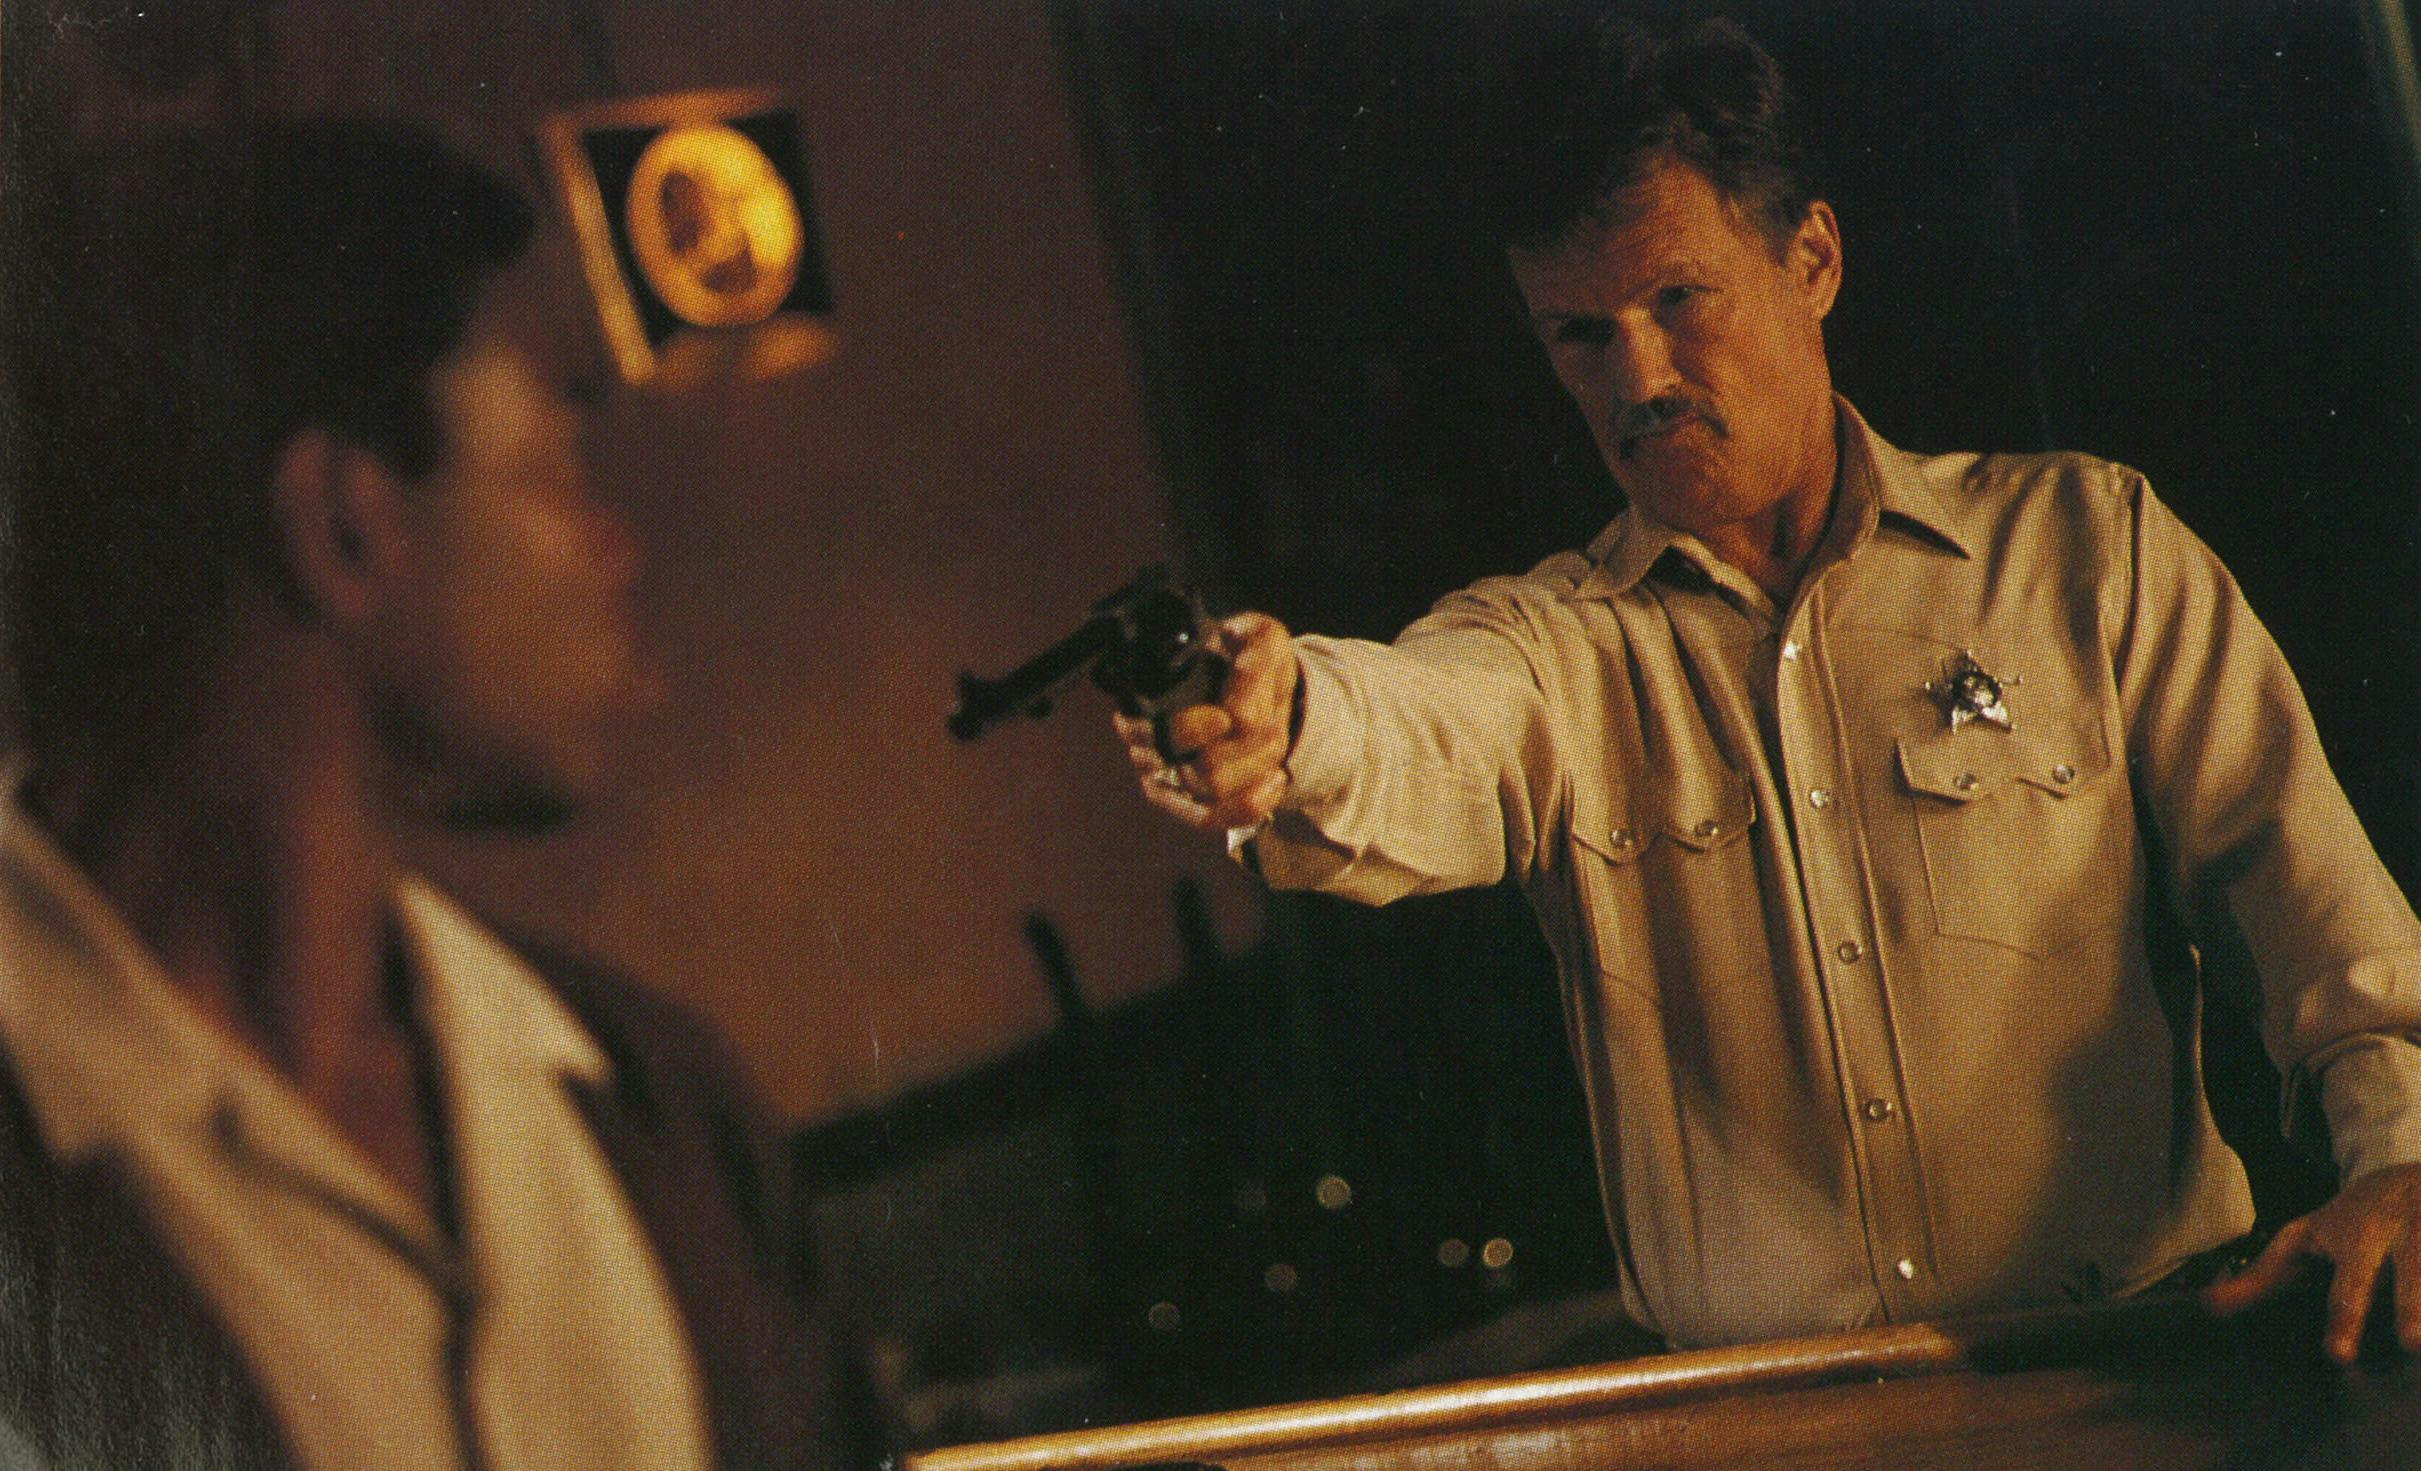 Still from Lone Star of Kristofferson pointing a gun at someone out of focus.